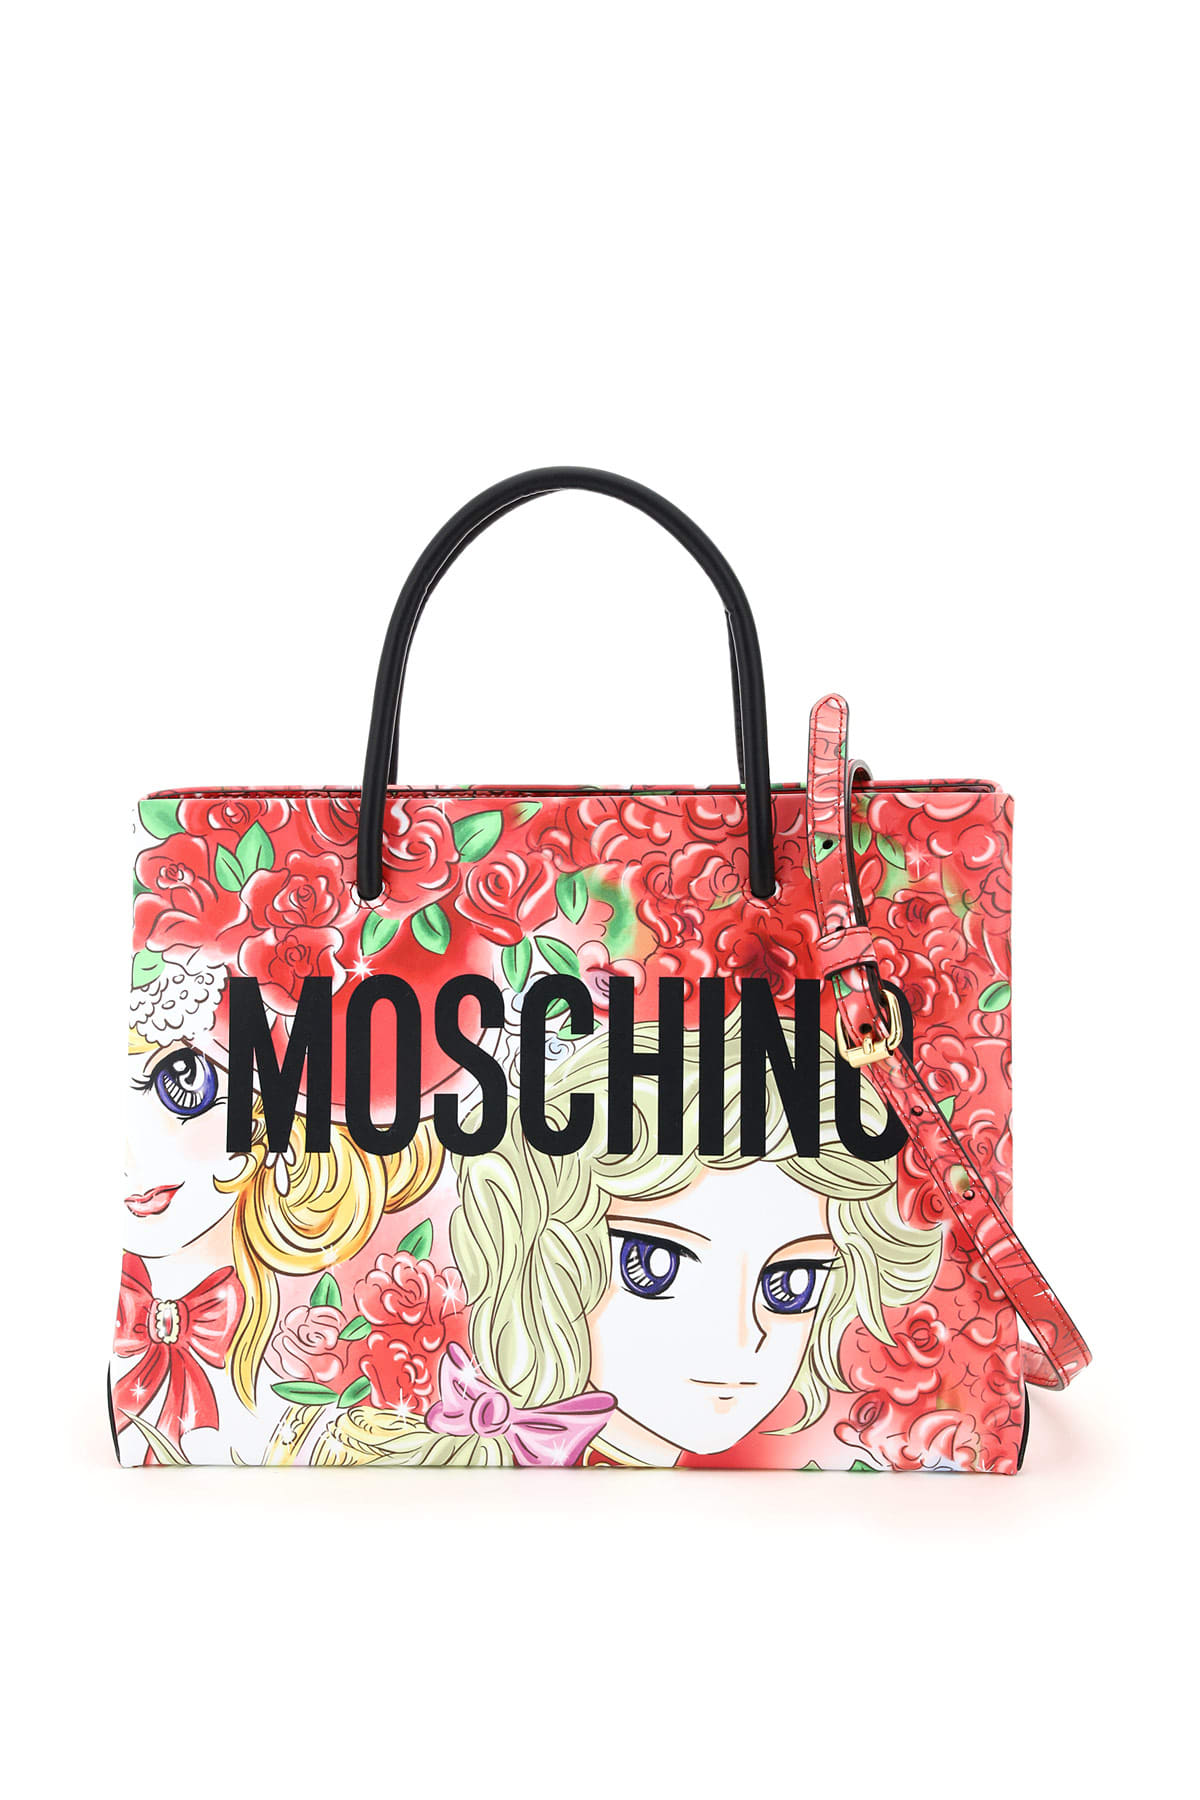 MOSCHINO MARIE ANTOINETTE LEATHER TOTE BAG LADY OSCAR PRINT,11518952